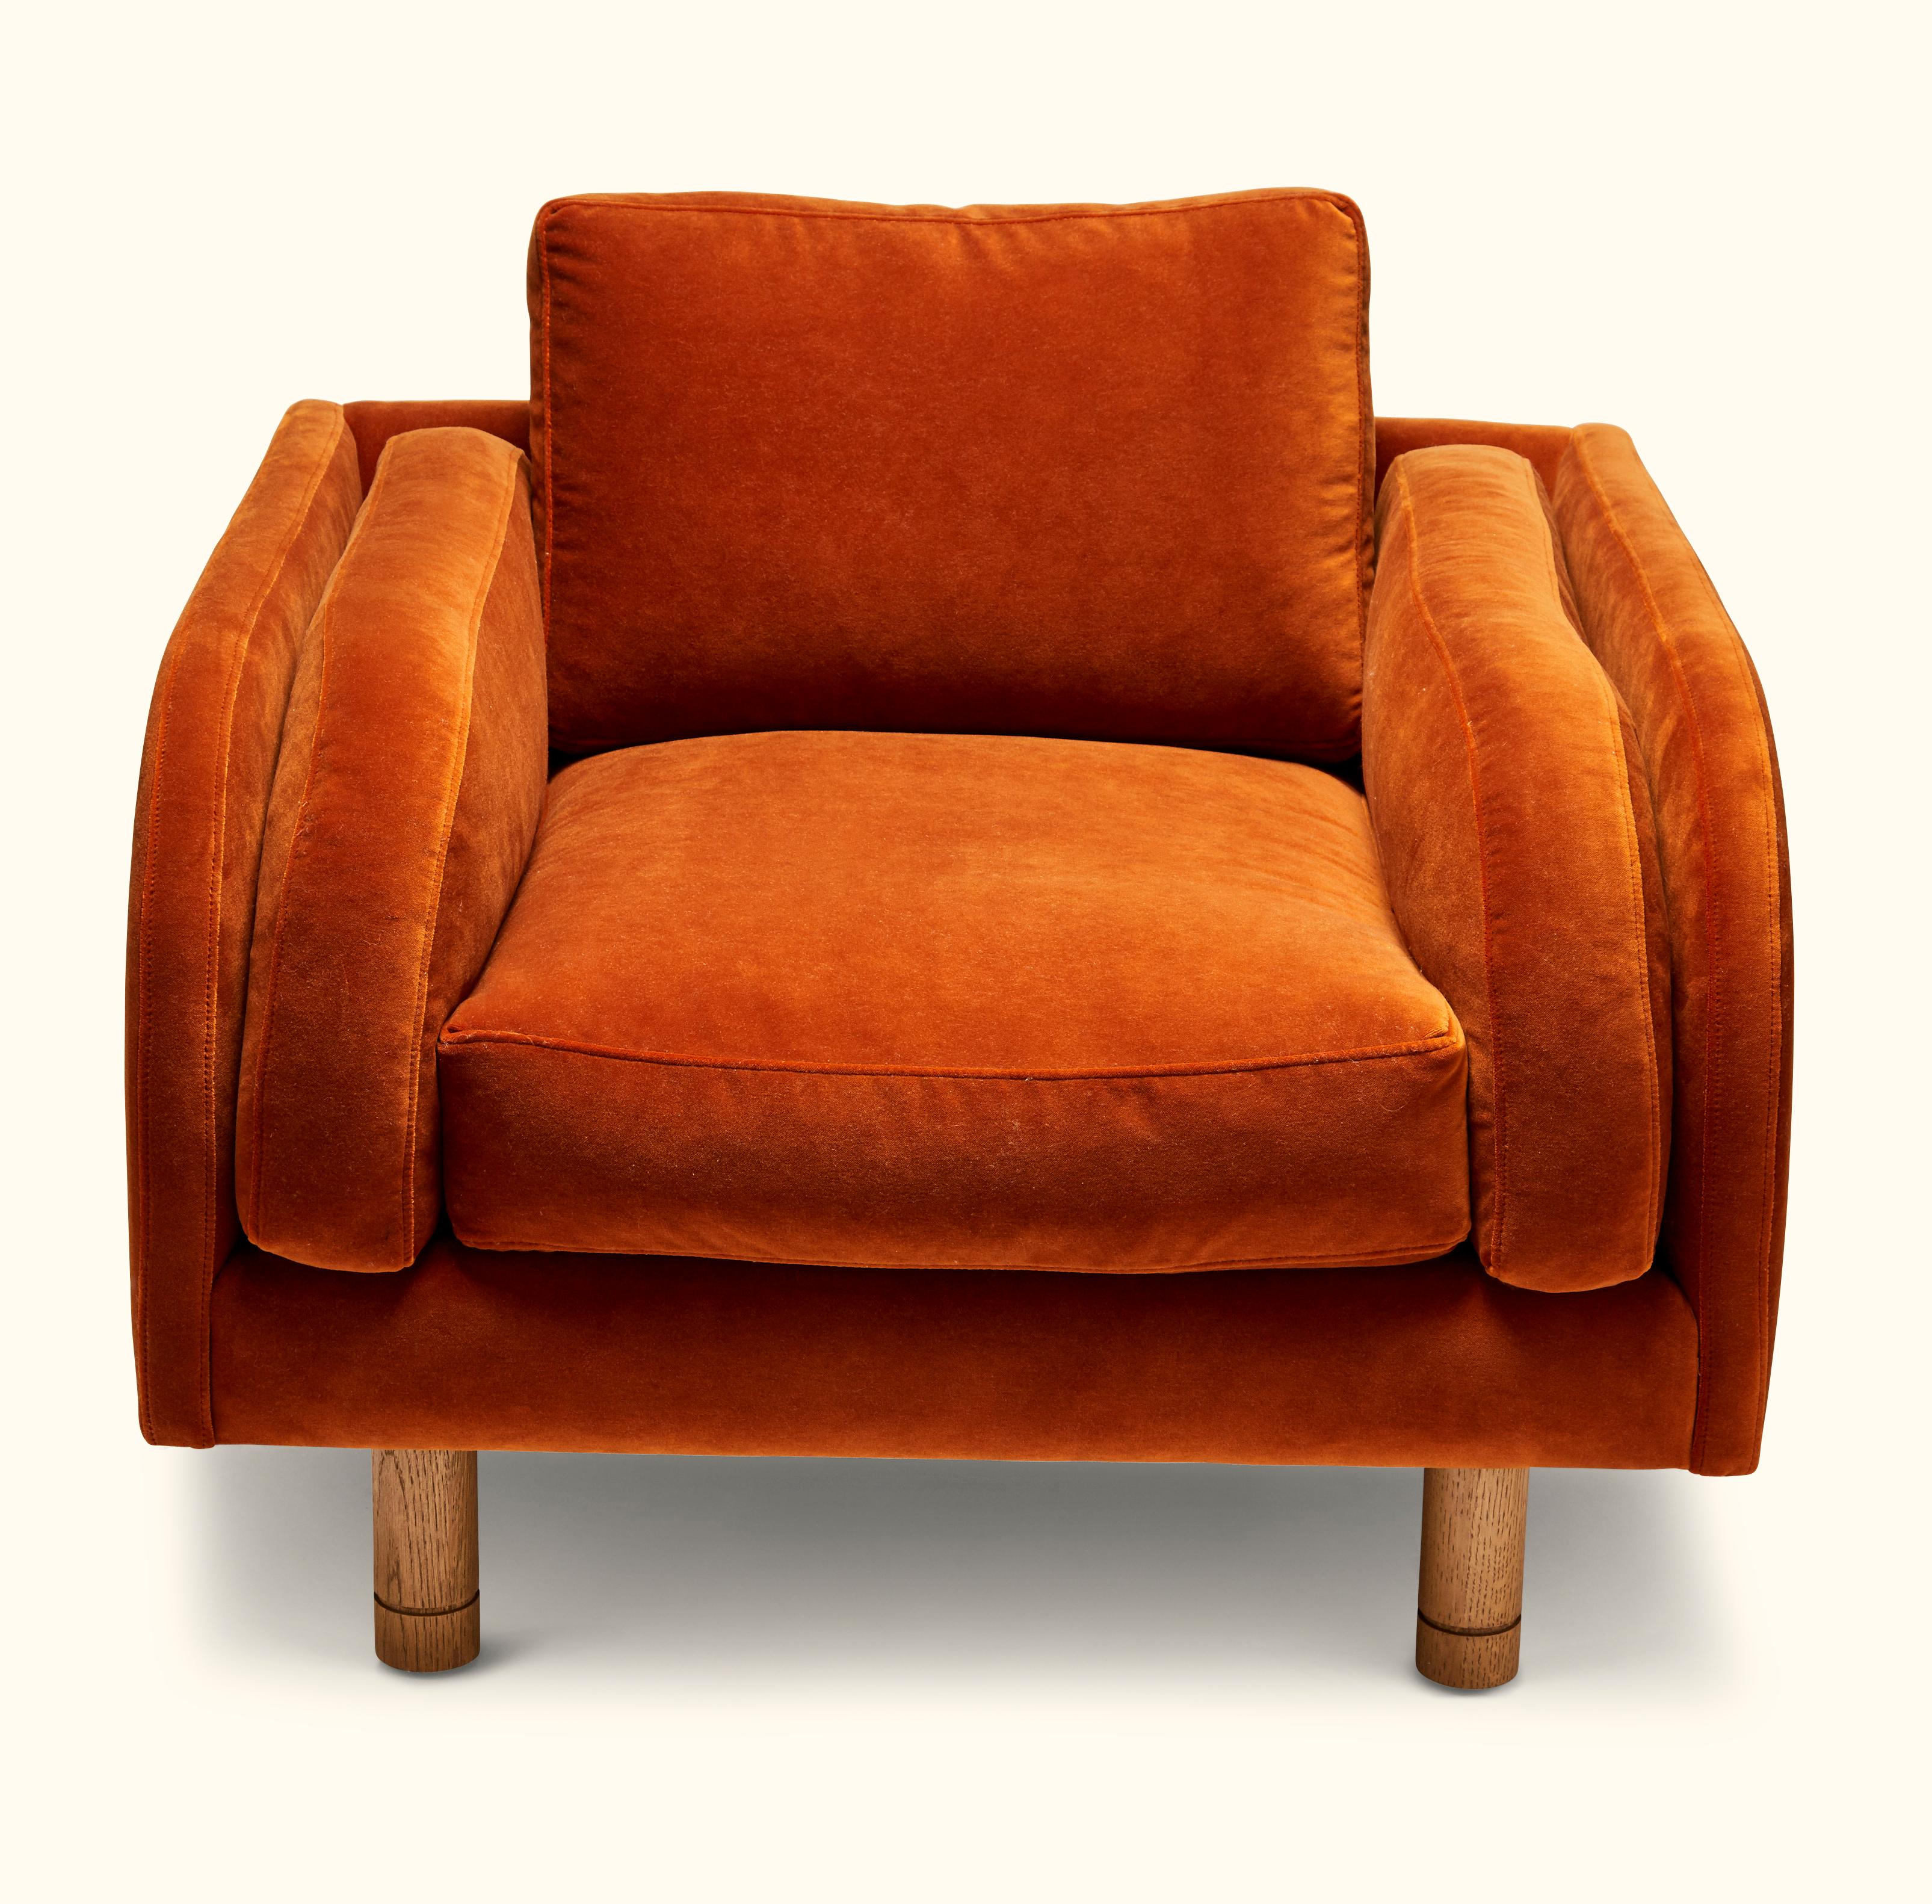 Upholstery Moreno Chair by Lawson-Fenning